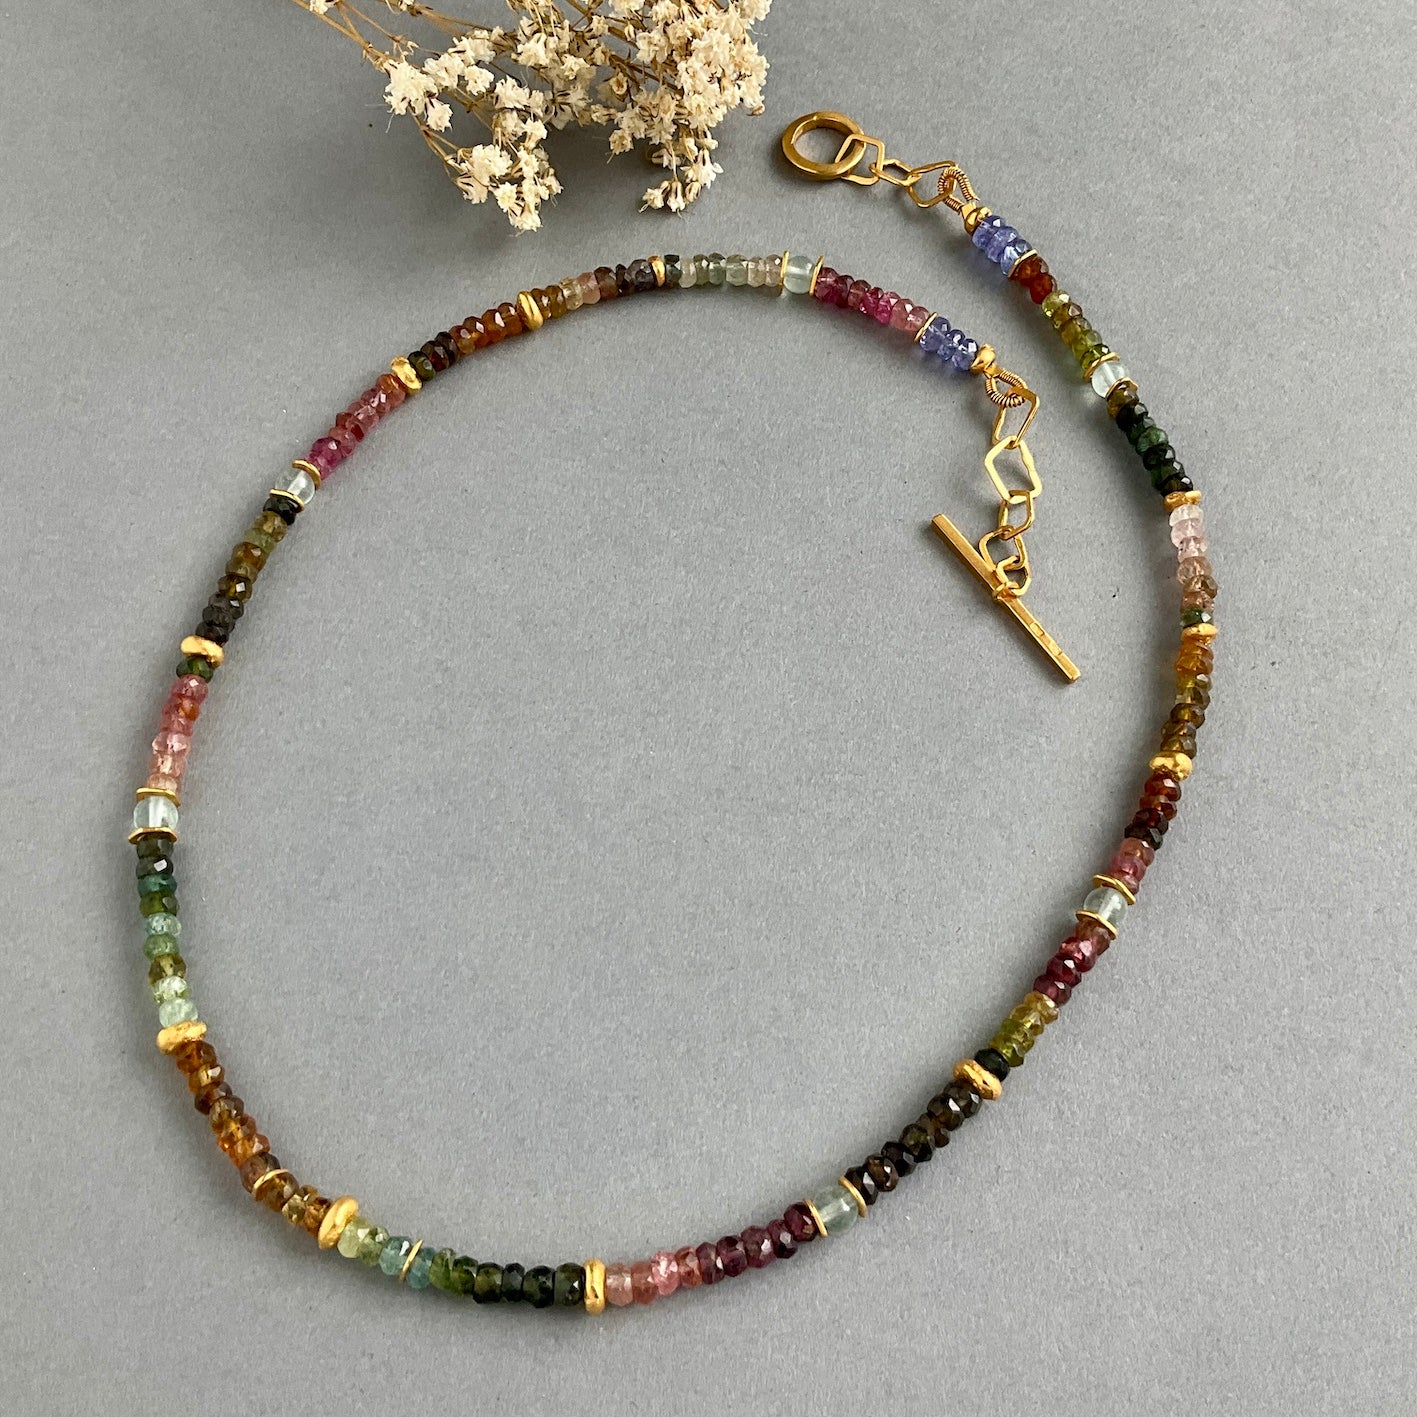 INDIAN SUMMER BEADED GOLD NECKLACE - TOURMALINE